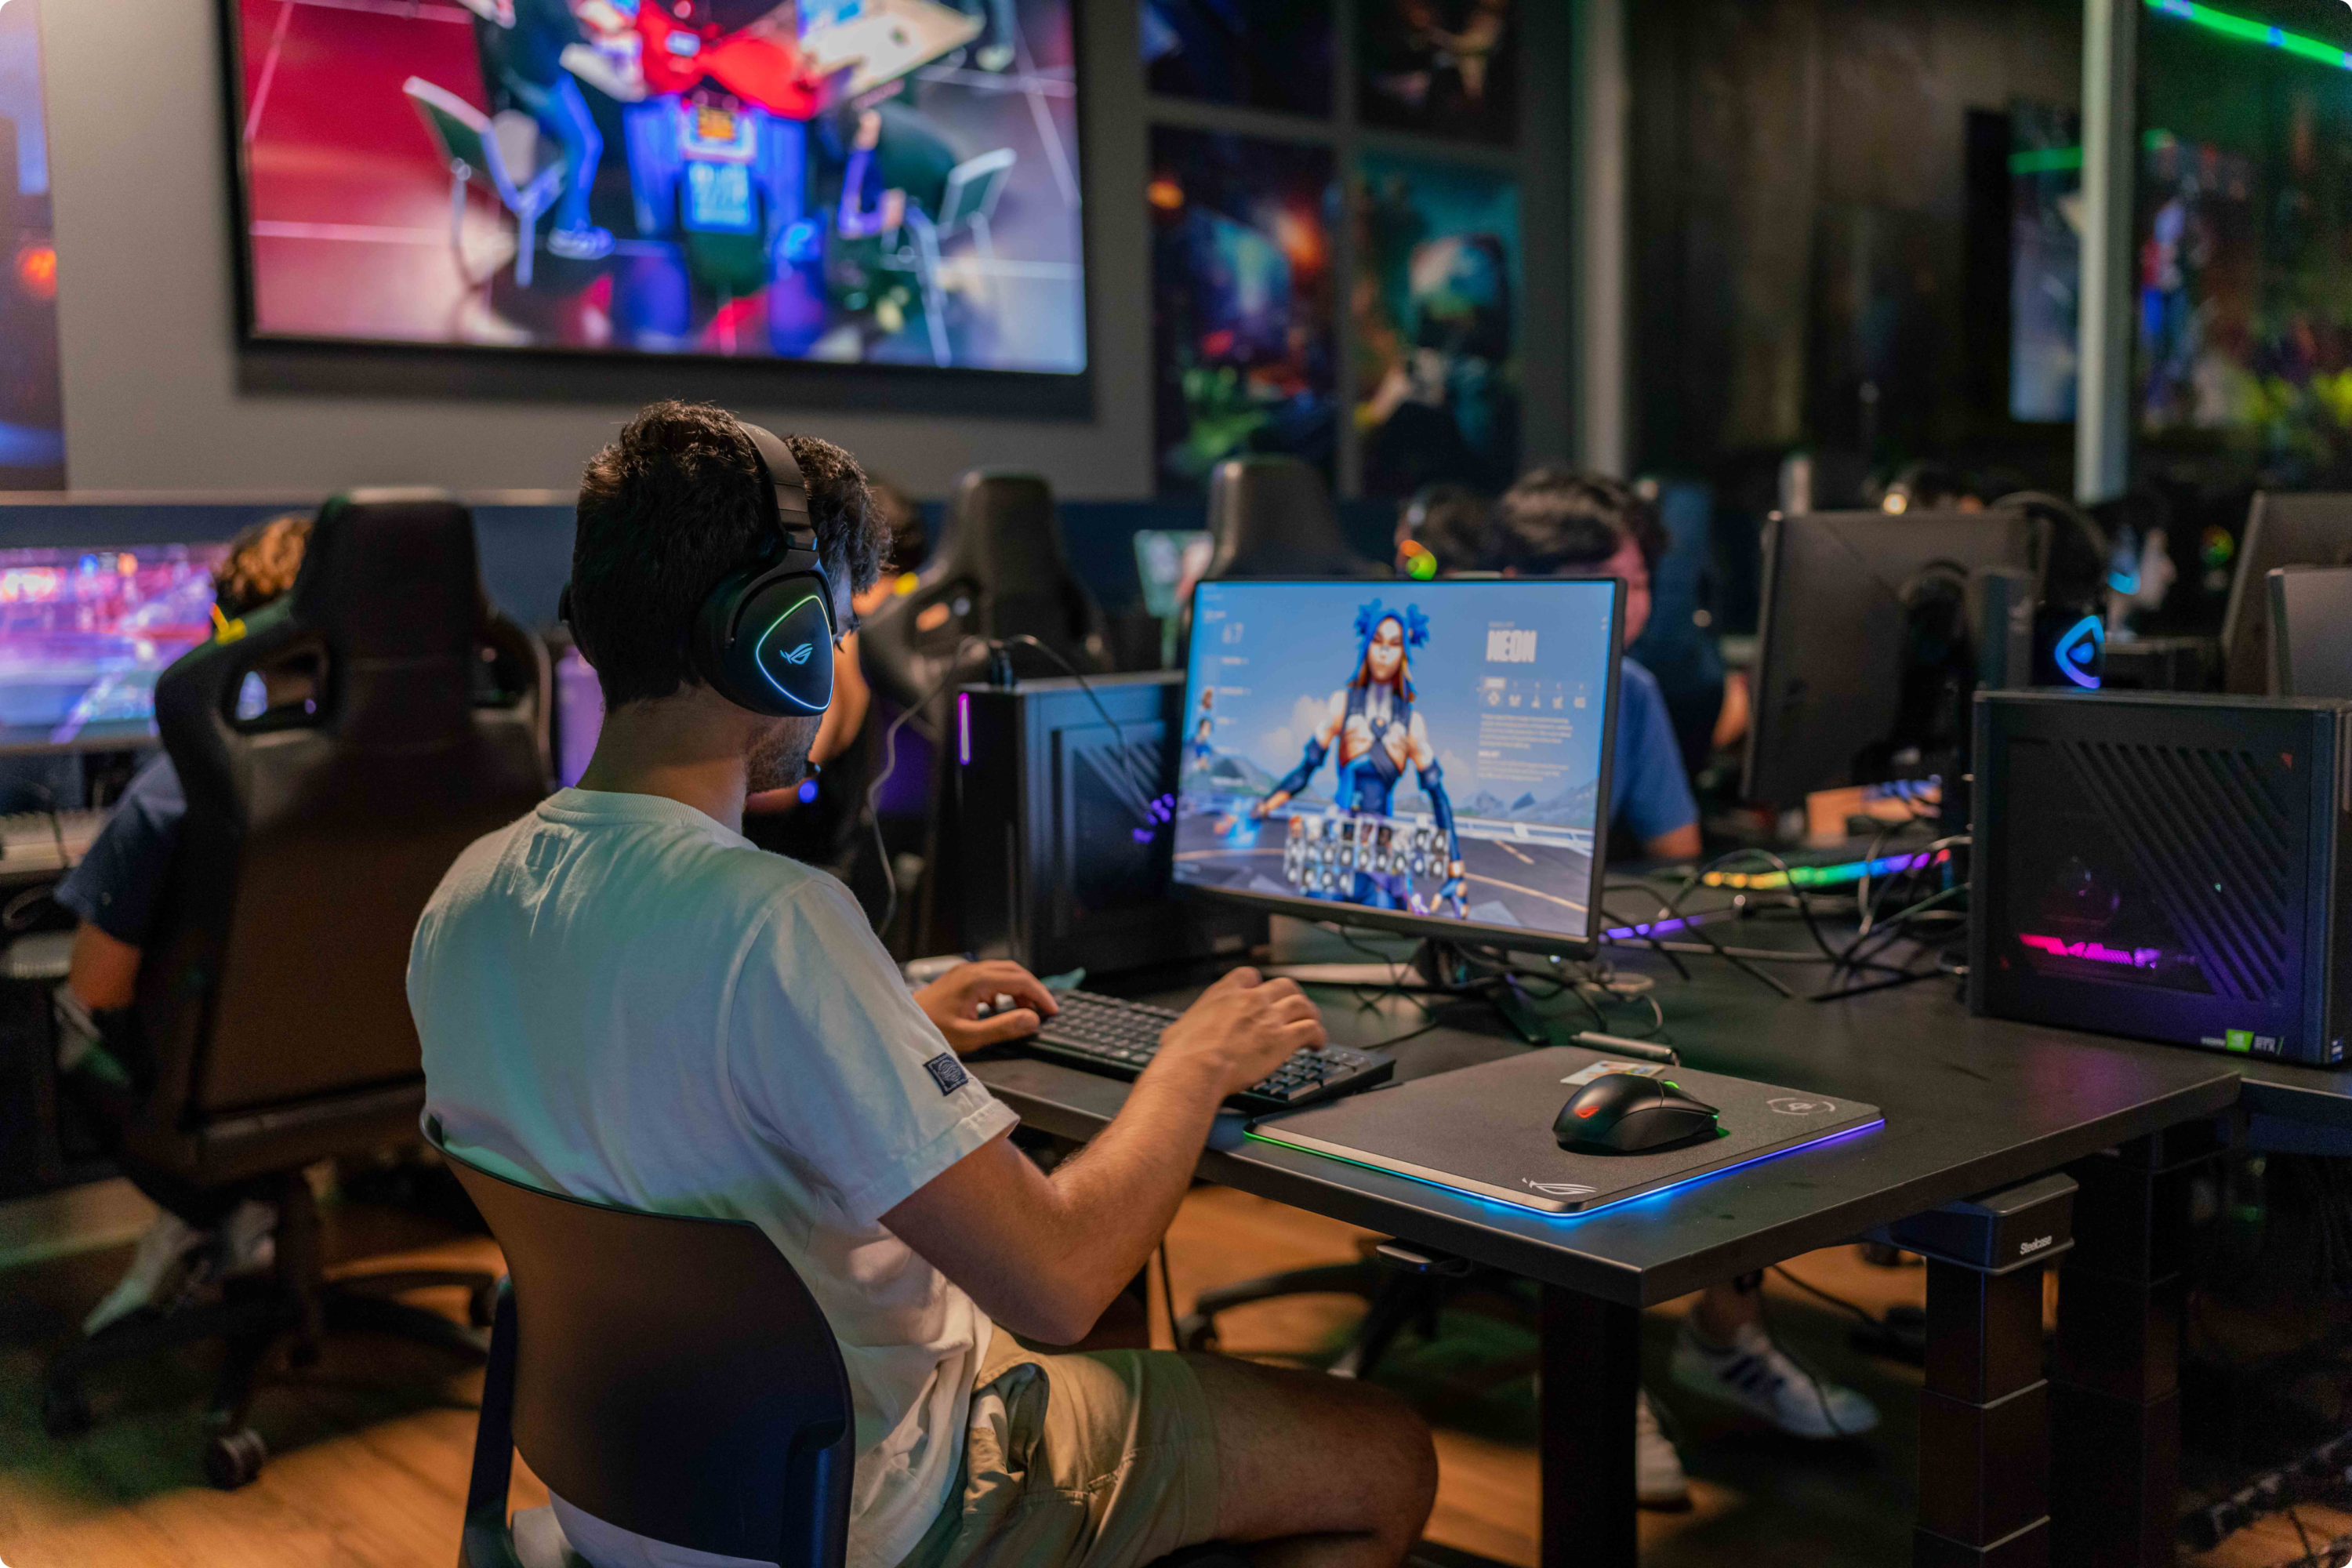 picture shows an individual playing games on a gaming pc while the background is filled with other student doing the same